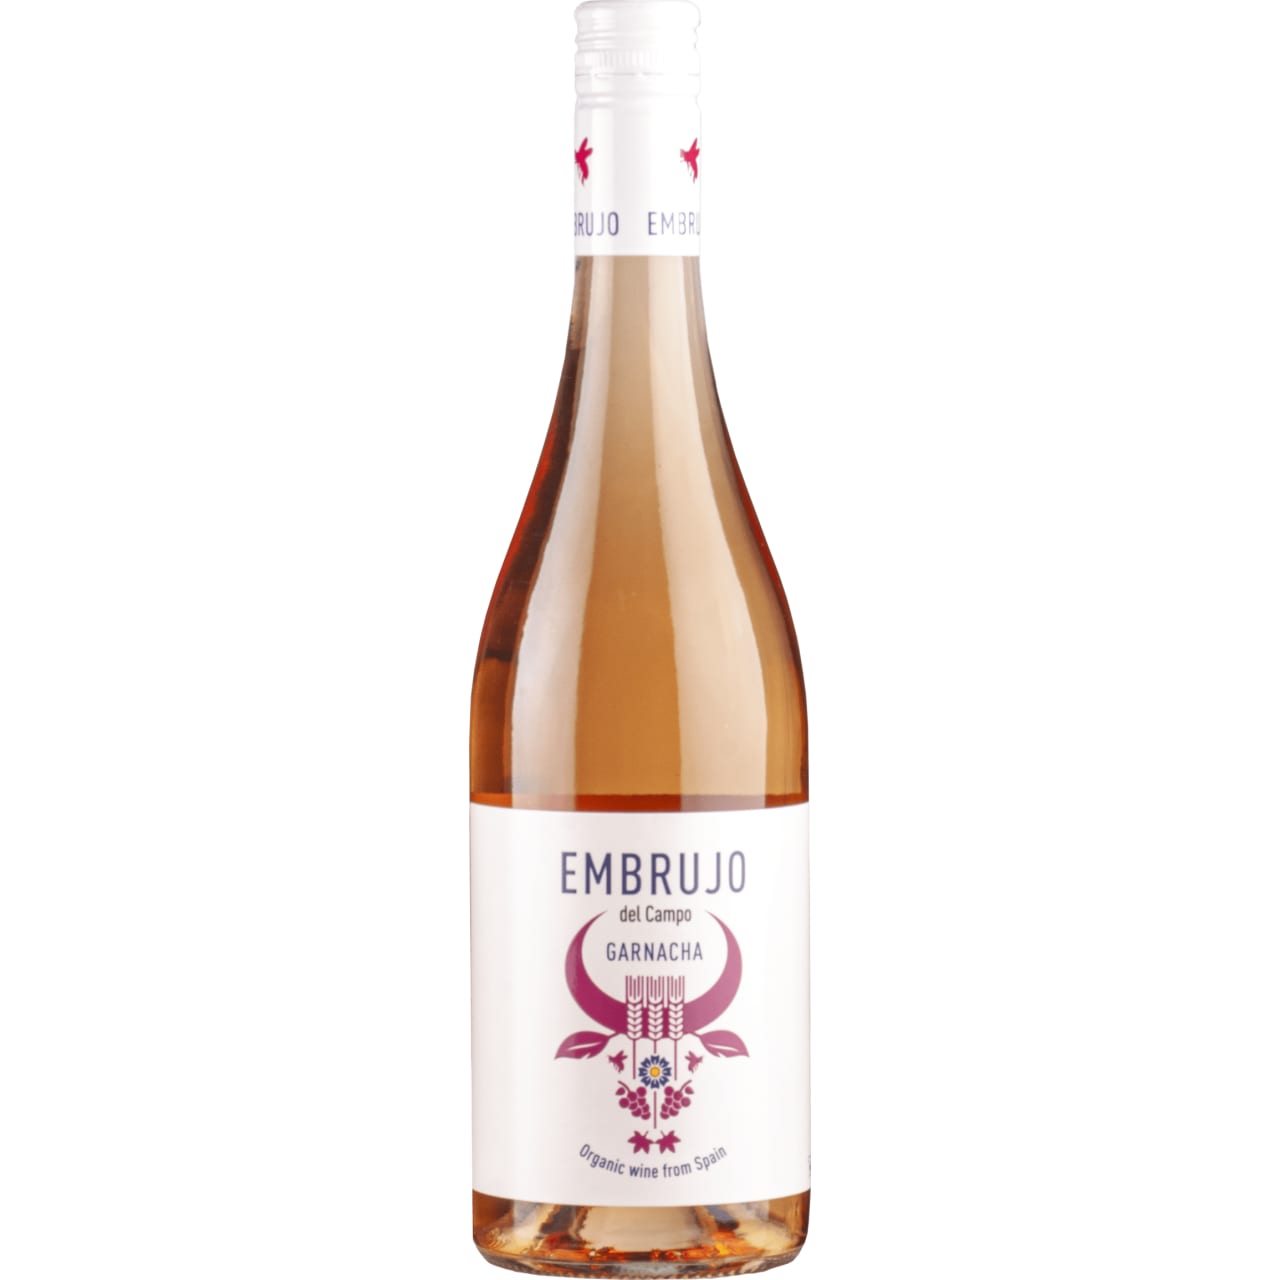 A subtle pink wine with flavours of strawberry and raspberry.